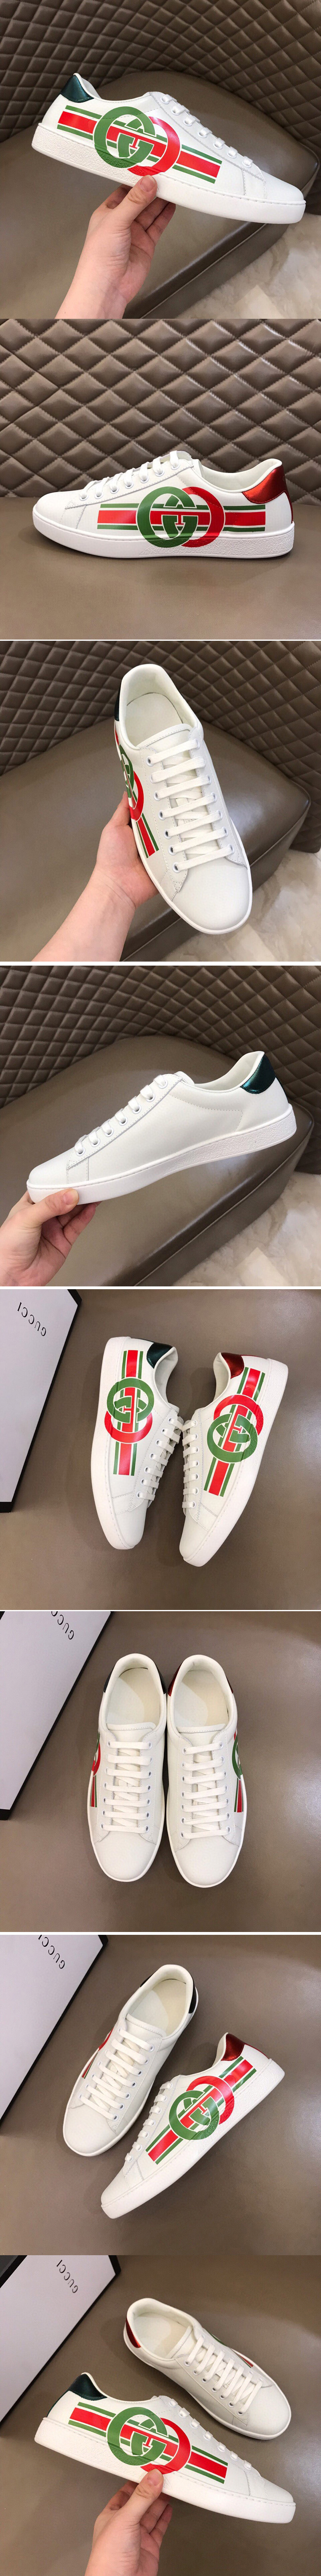 Replica Mens and Womens Gucci 577145 Ace sneaker with Interlocking G